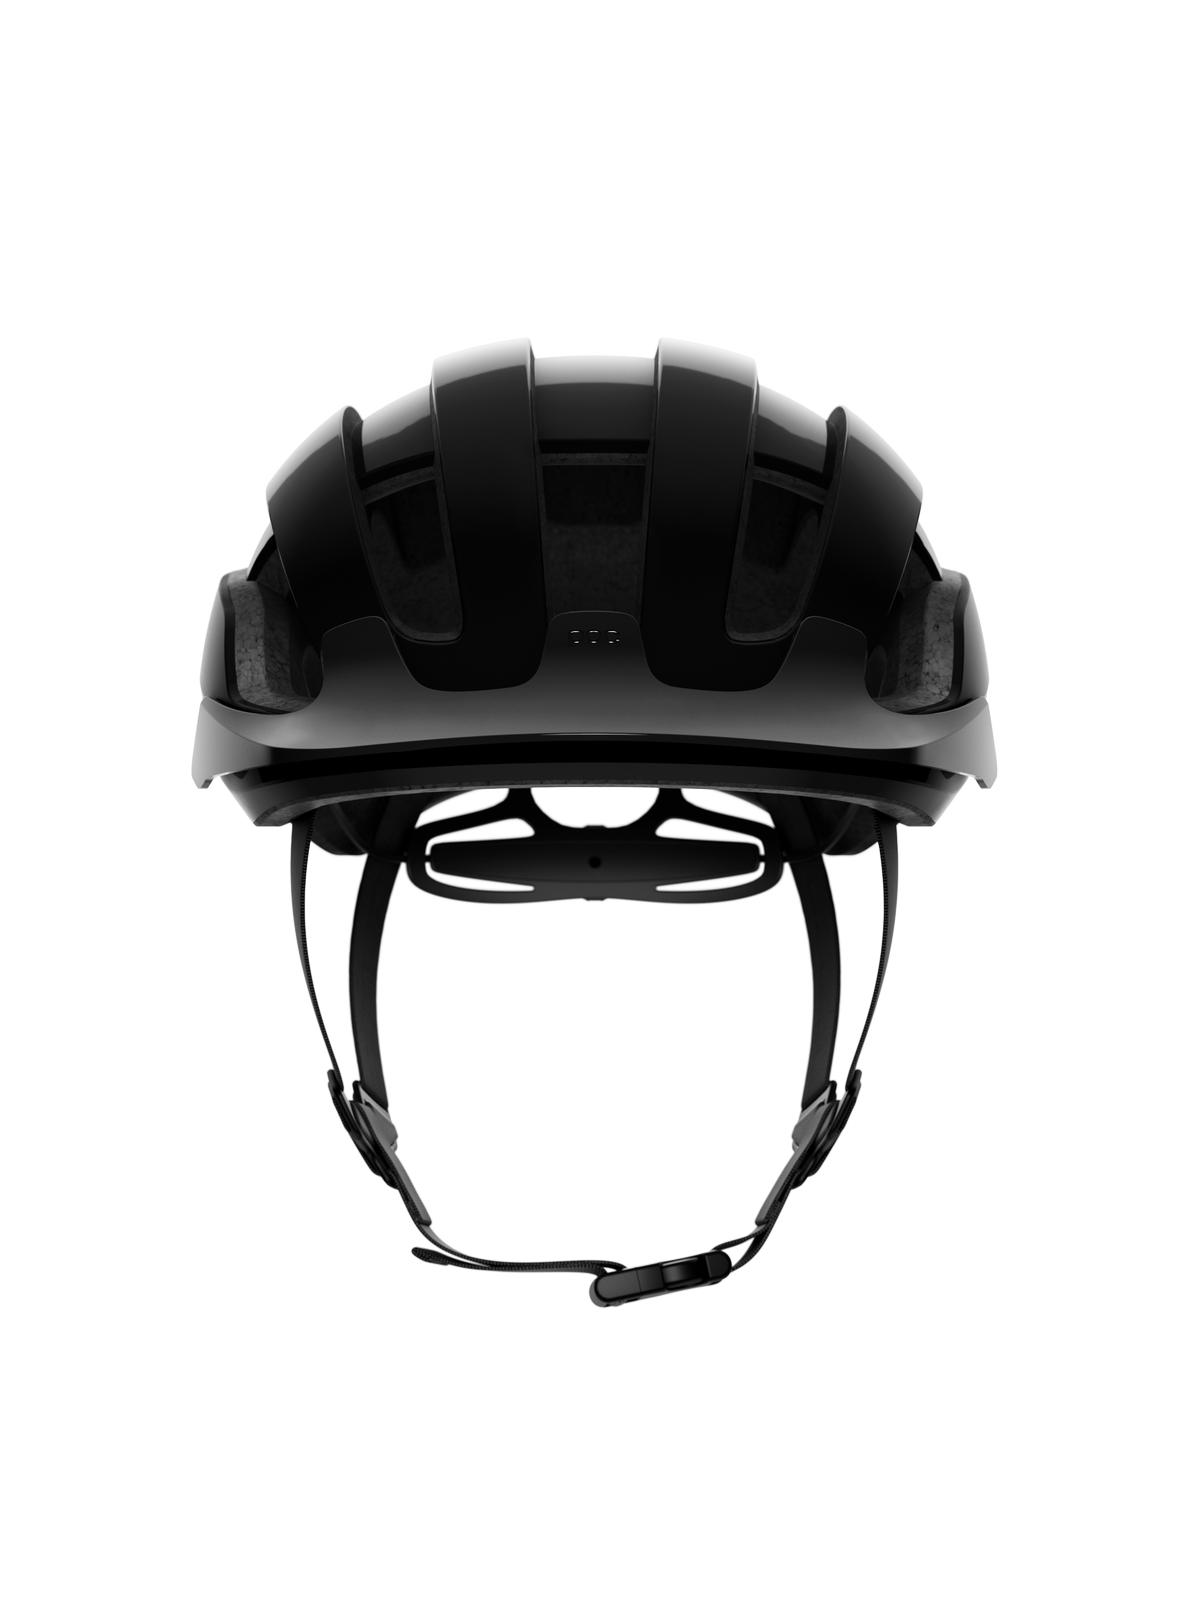 Kask Rowerowy POC OMNE AIR RESISTANCE SPIN